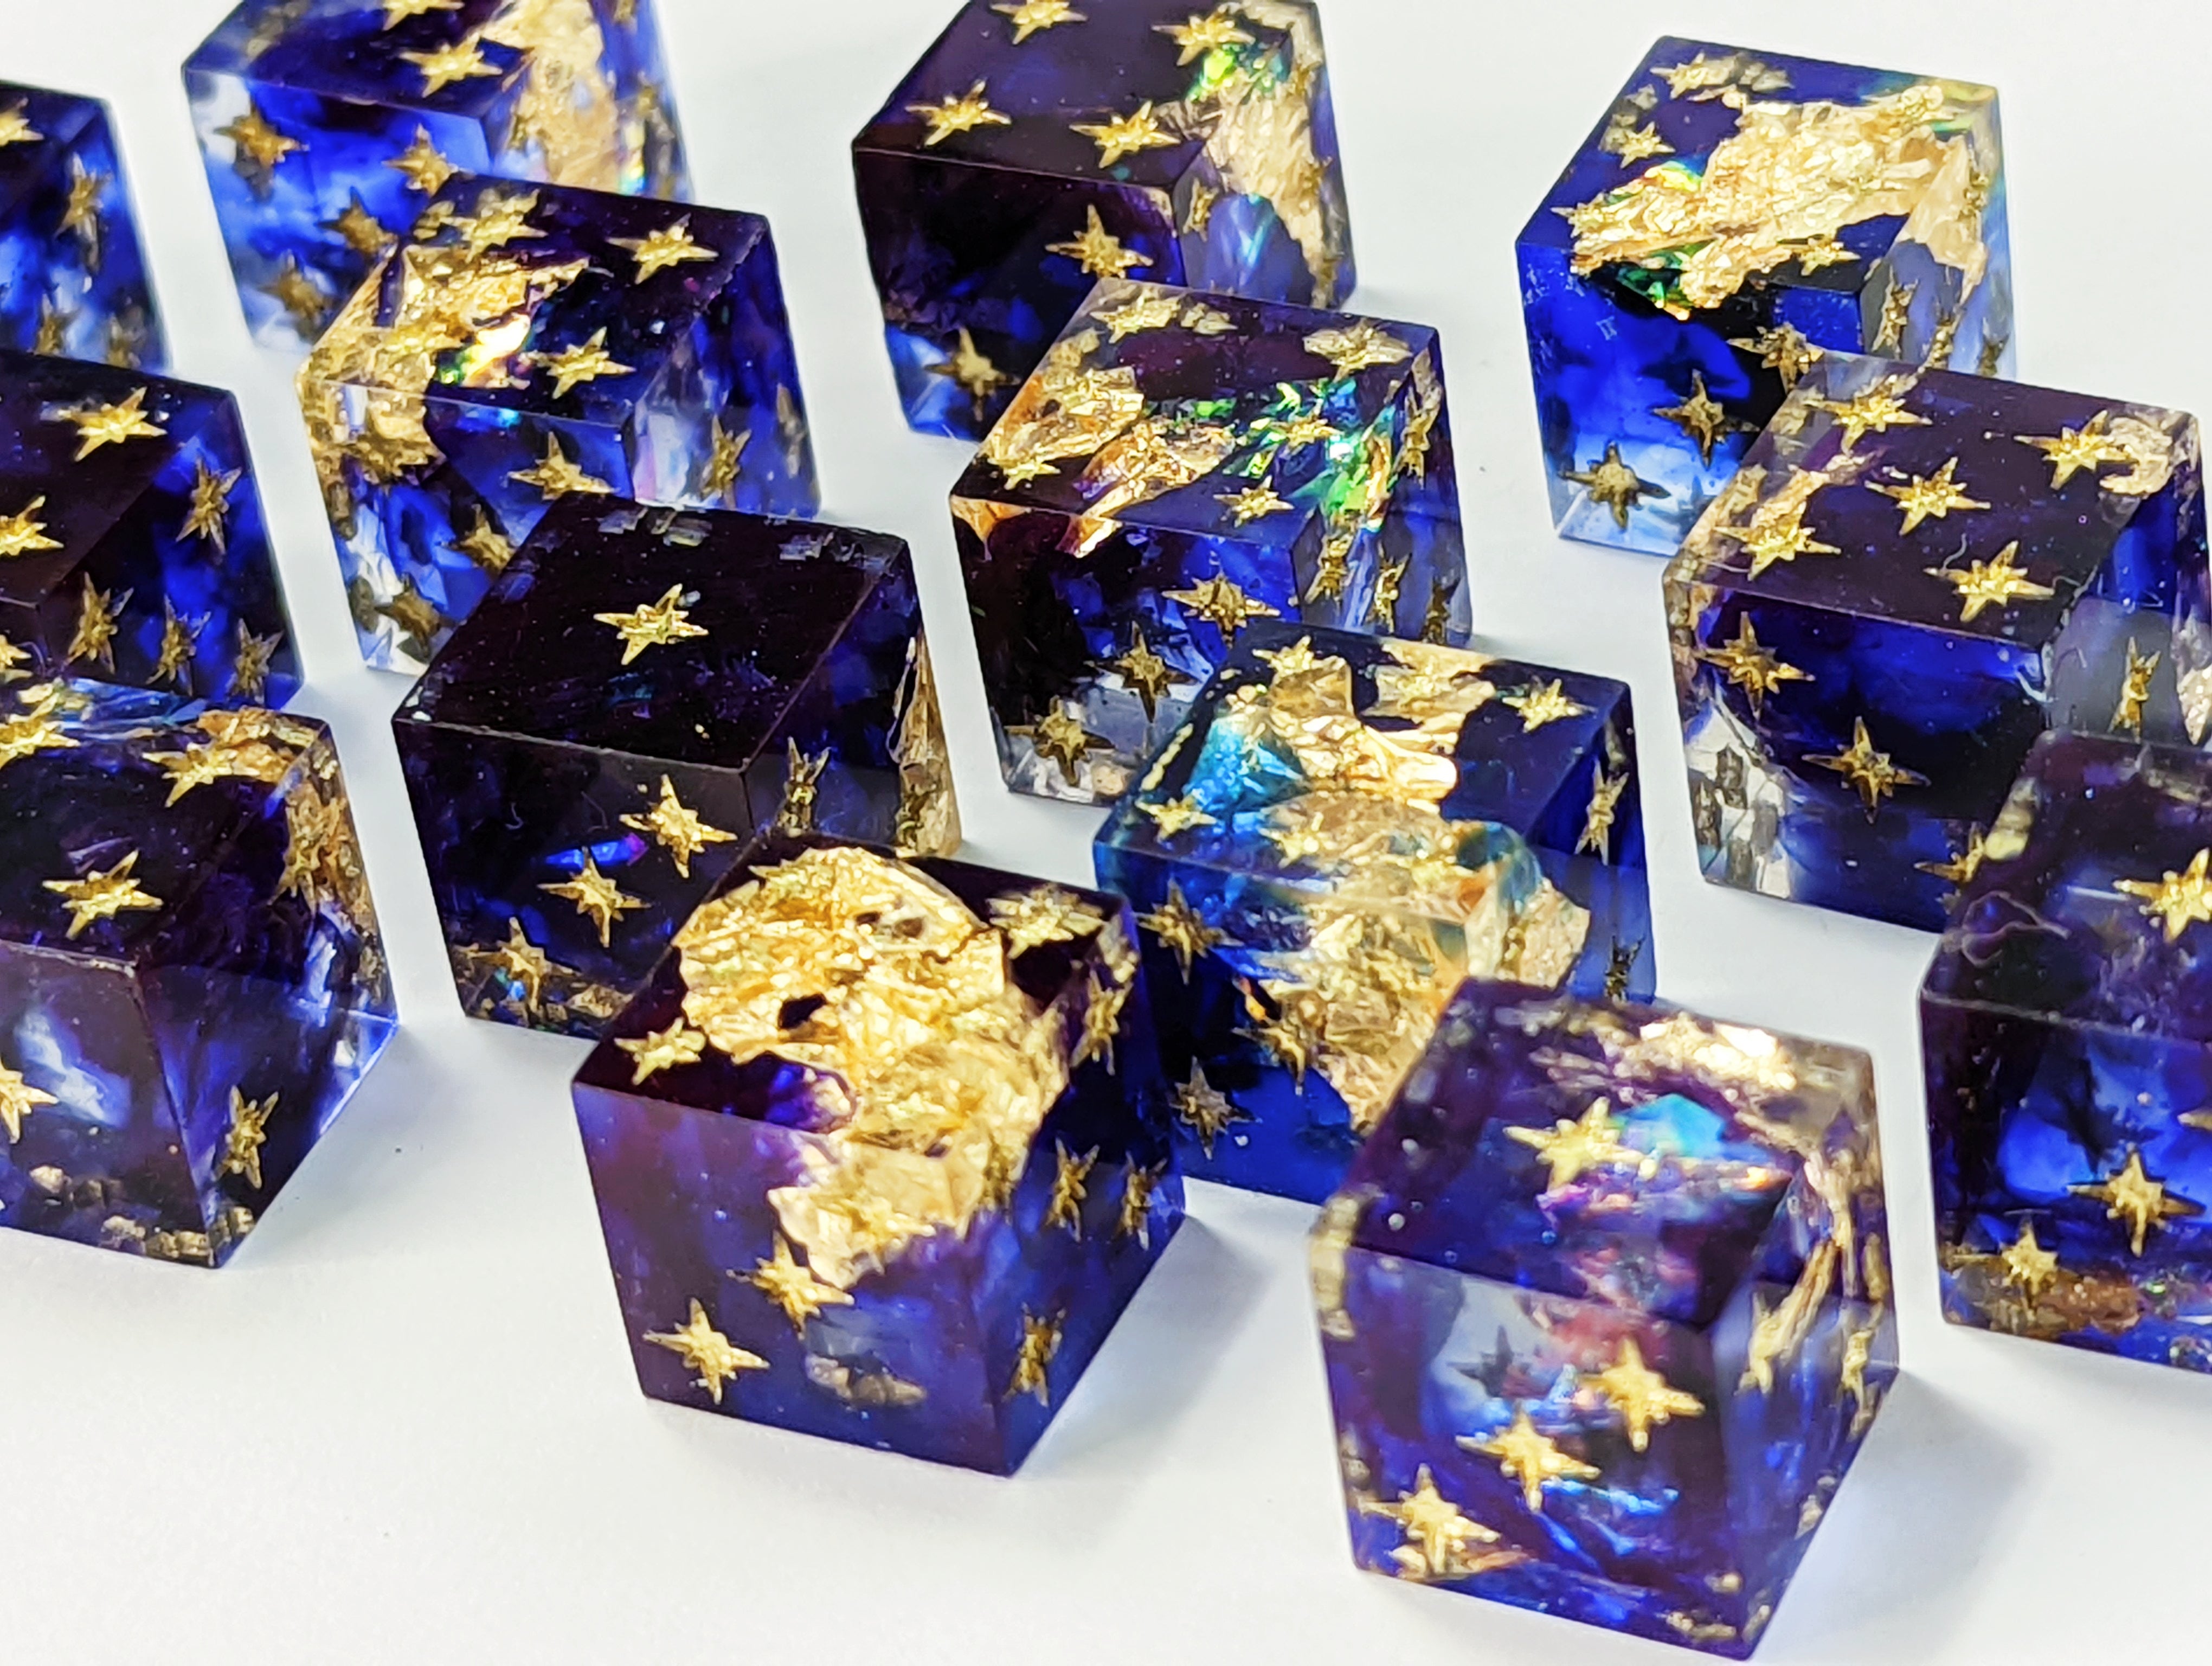 Deep sapphire blue with a swirl of black. Big gold leaf flakes and flashes of color hid deep within the depth of blue. Inked in gold.